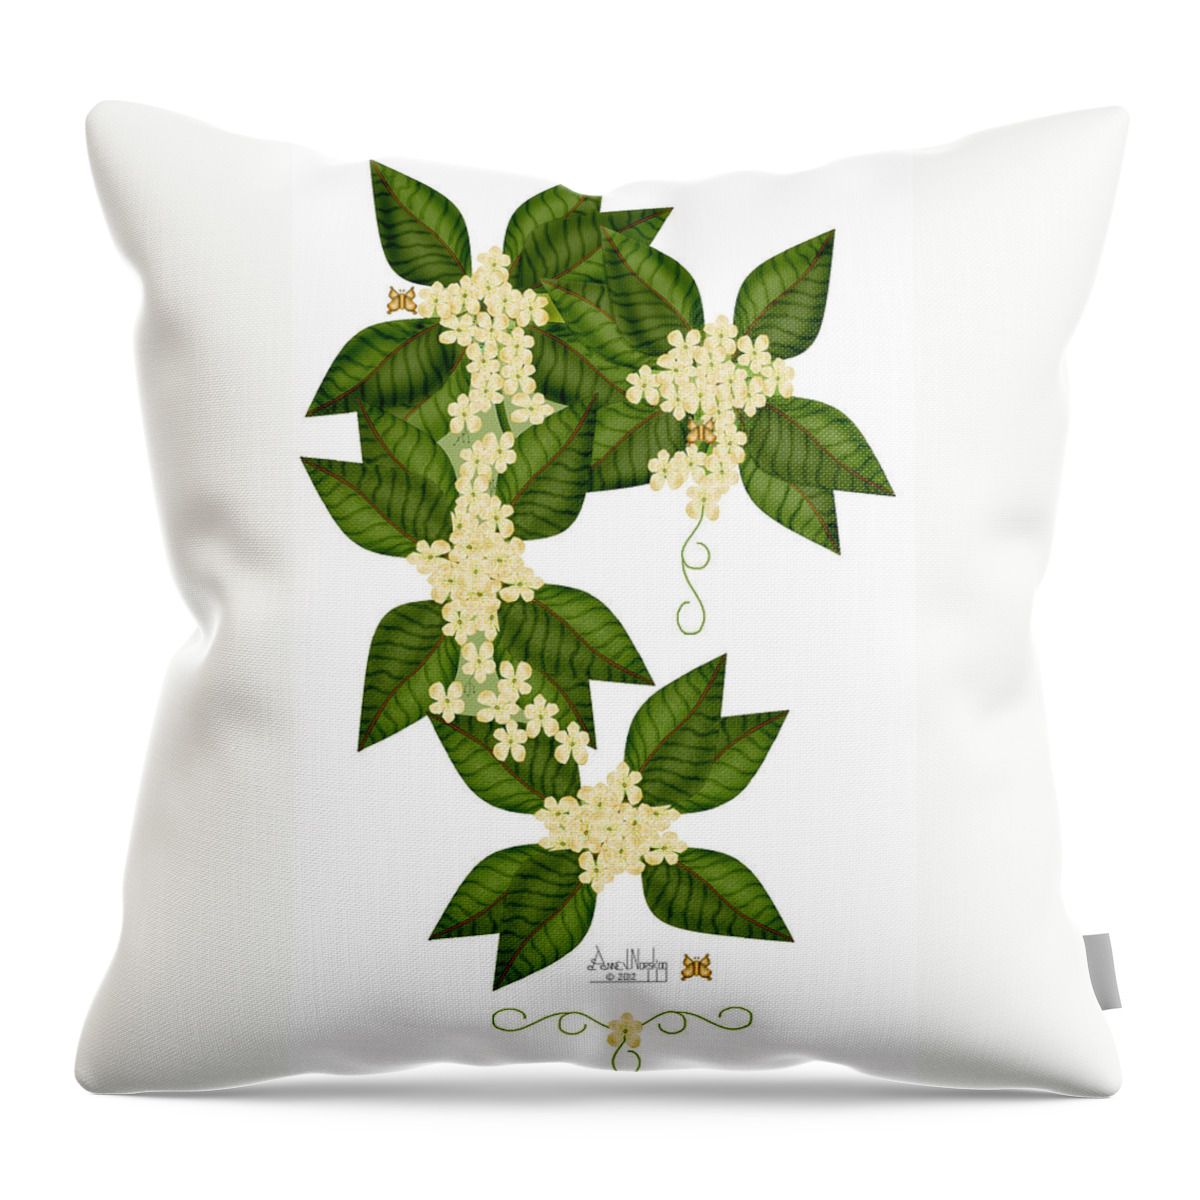 Anne Norskog Hand-drawn Digital Painting Throw Pillow featuring the painting English Laurel by Anne Norskog